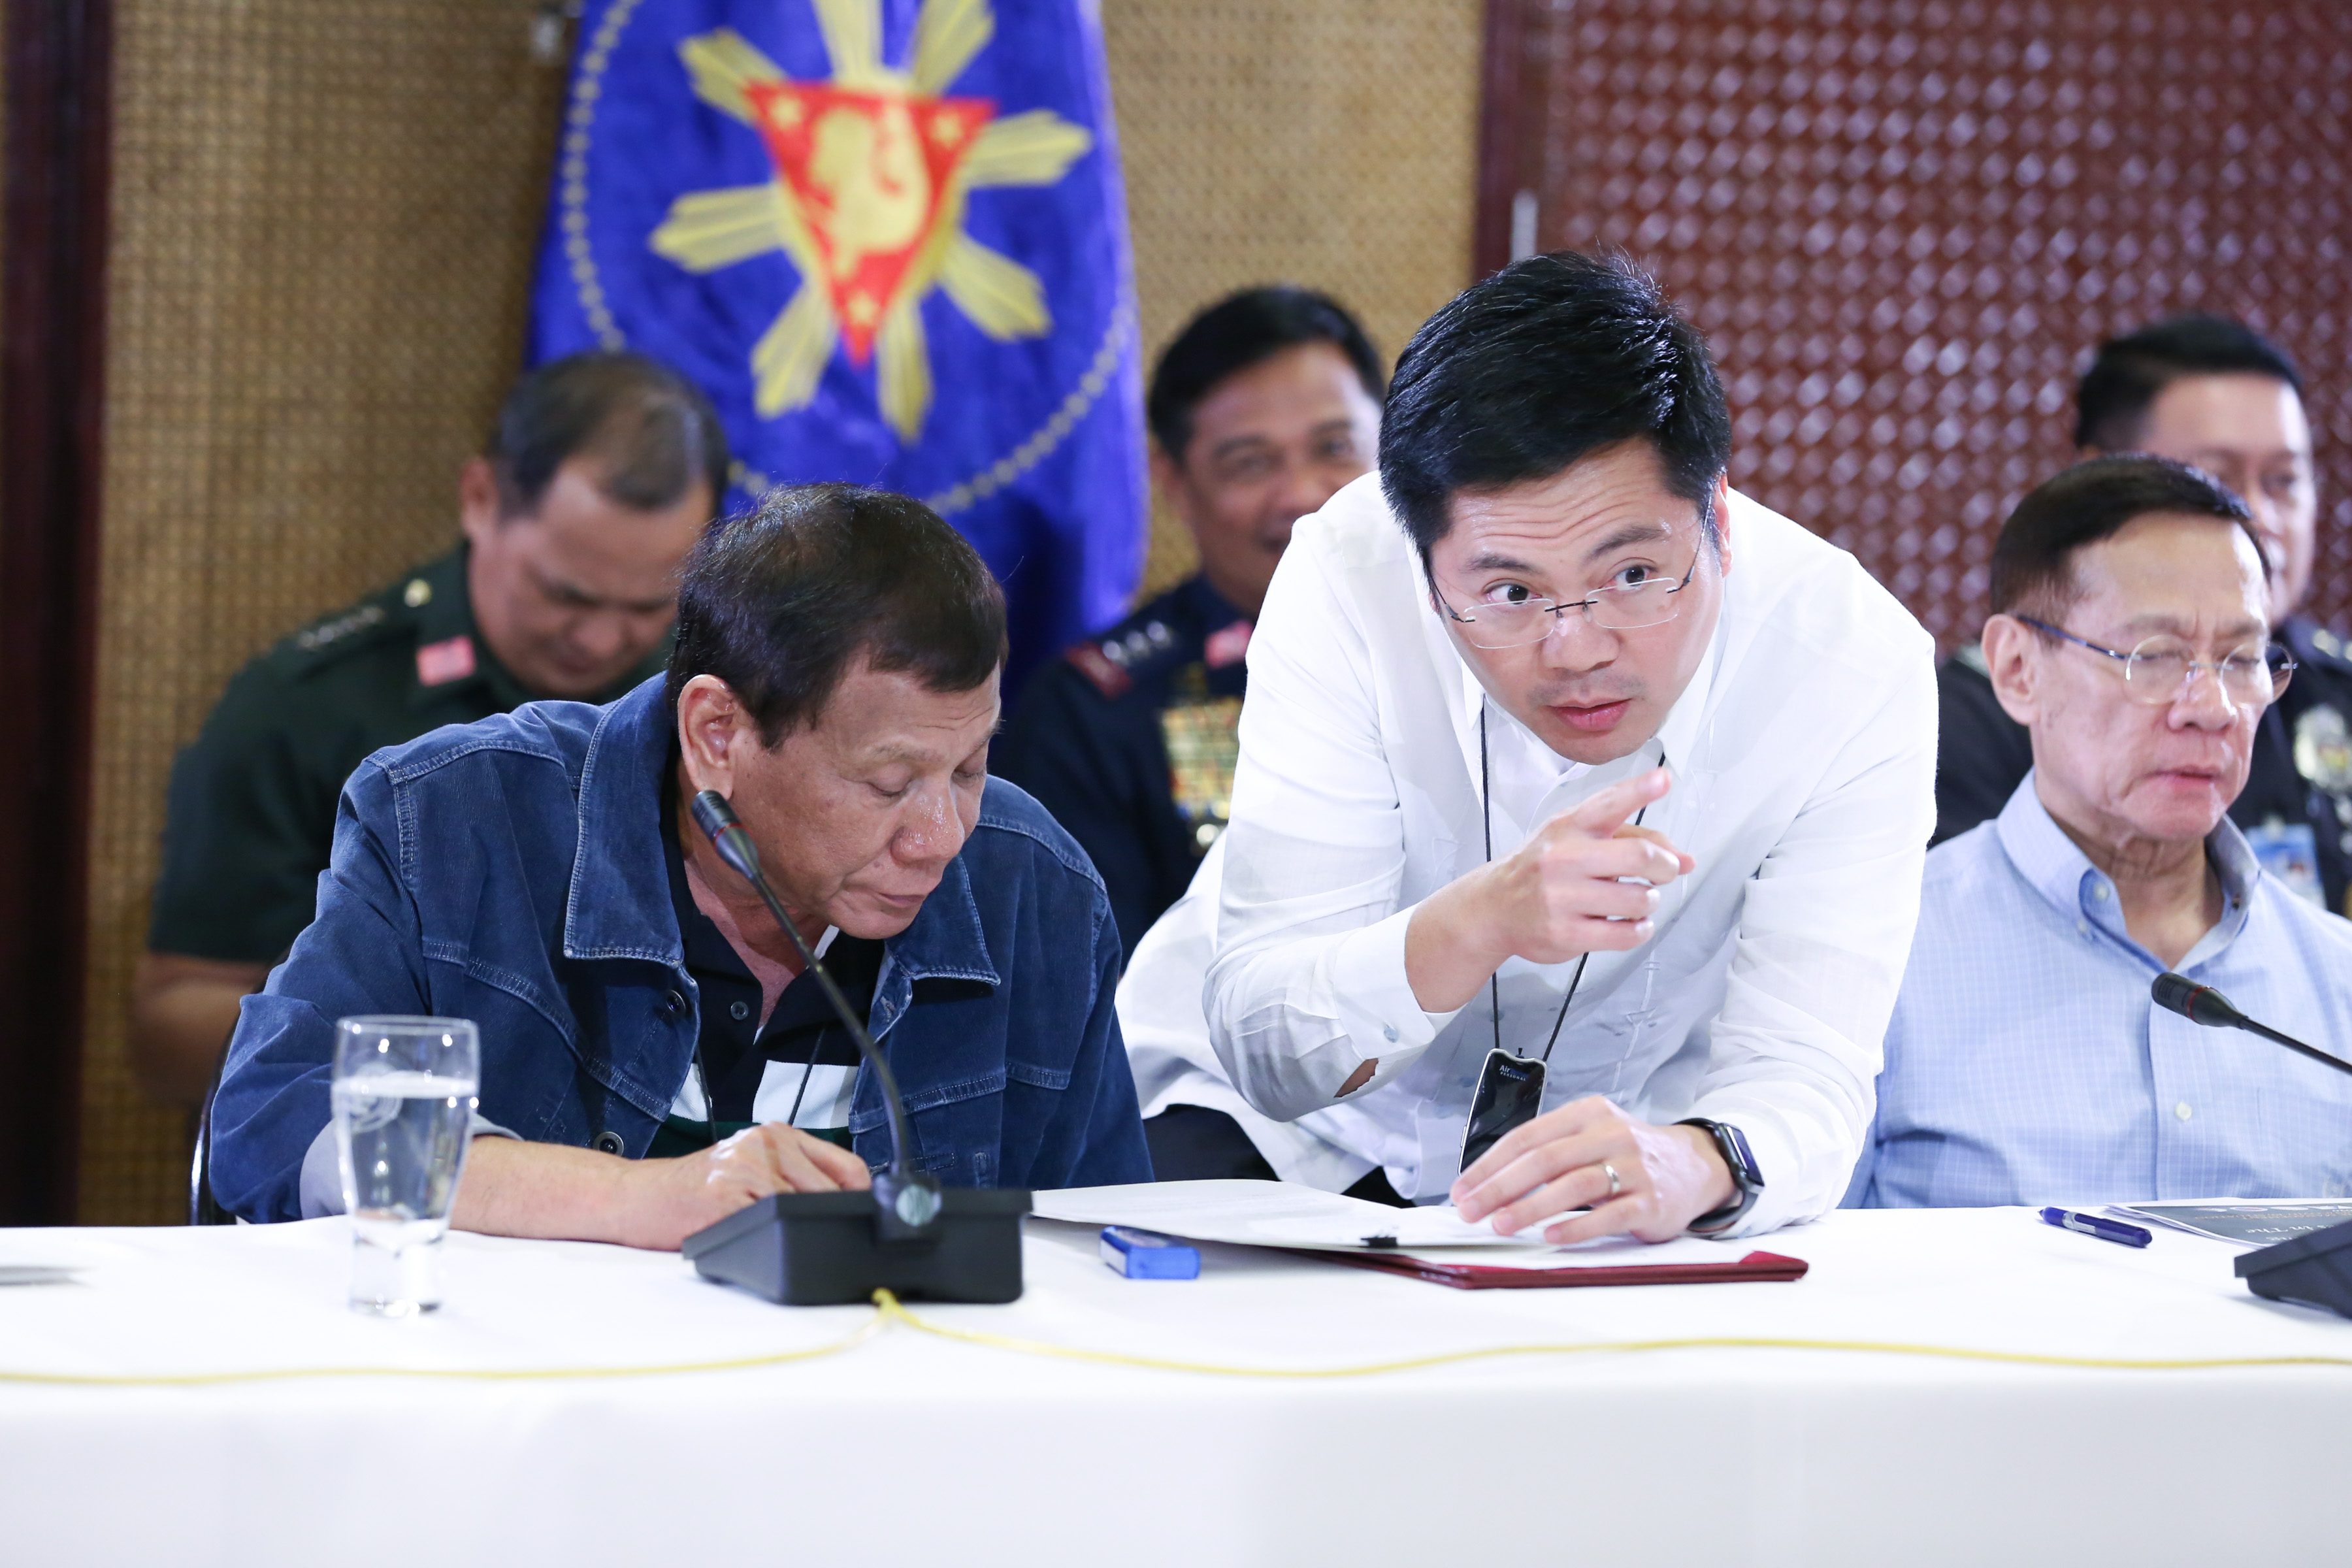 CORONAVIRUS TASK FORCE. President Rodrigo Duterte confers with Cabinet Secretary Karlo Nograles during a meeting with the Inter-Agency Task Force on the Emerging Infectious Diseases on March 12, 2020. Malacañang file photo 